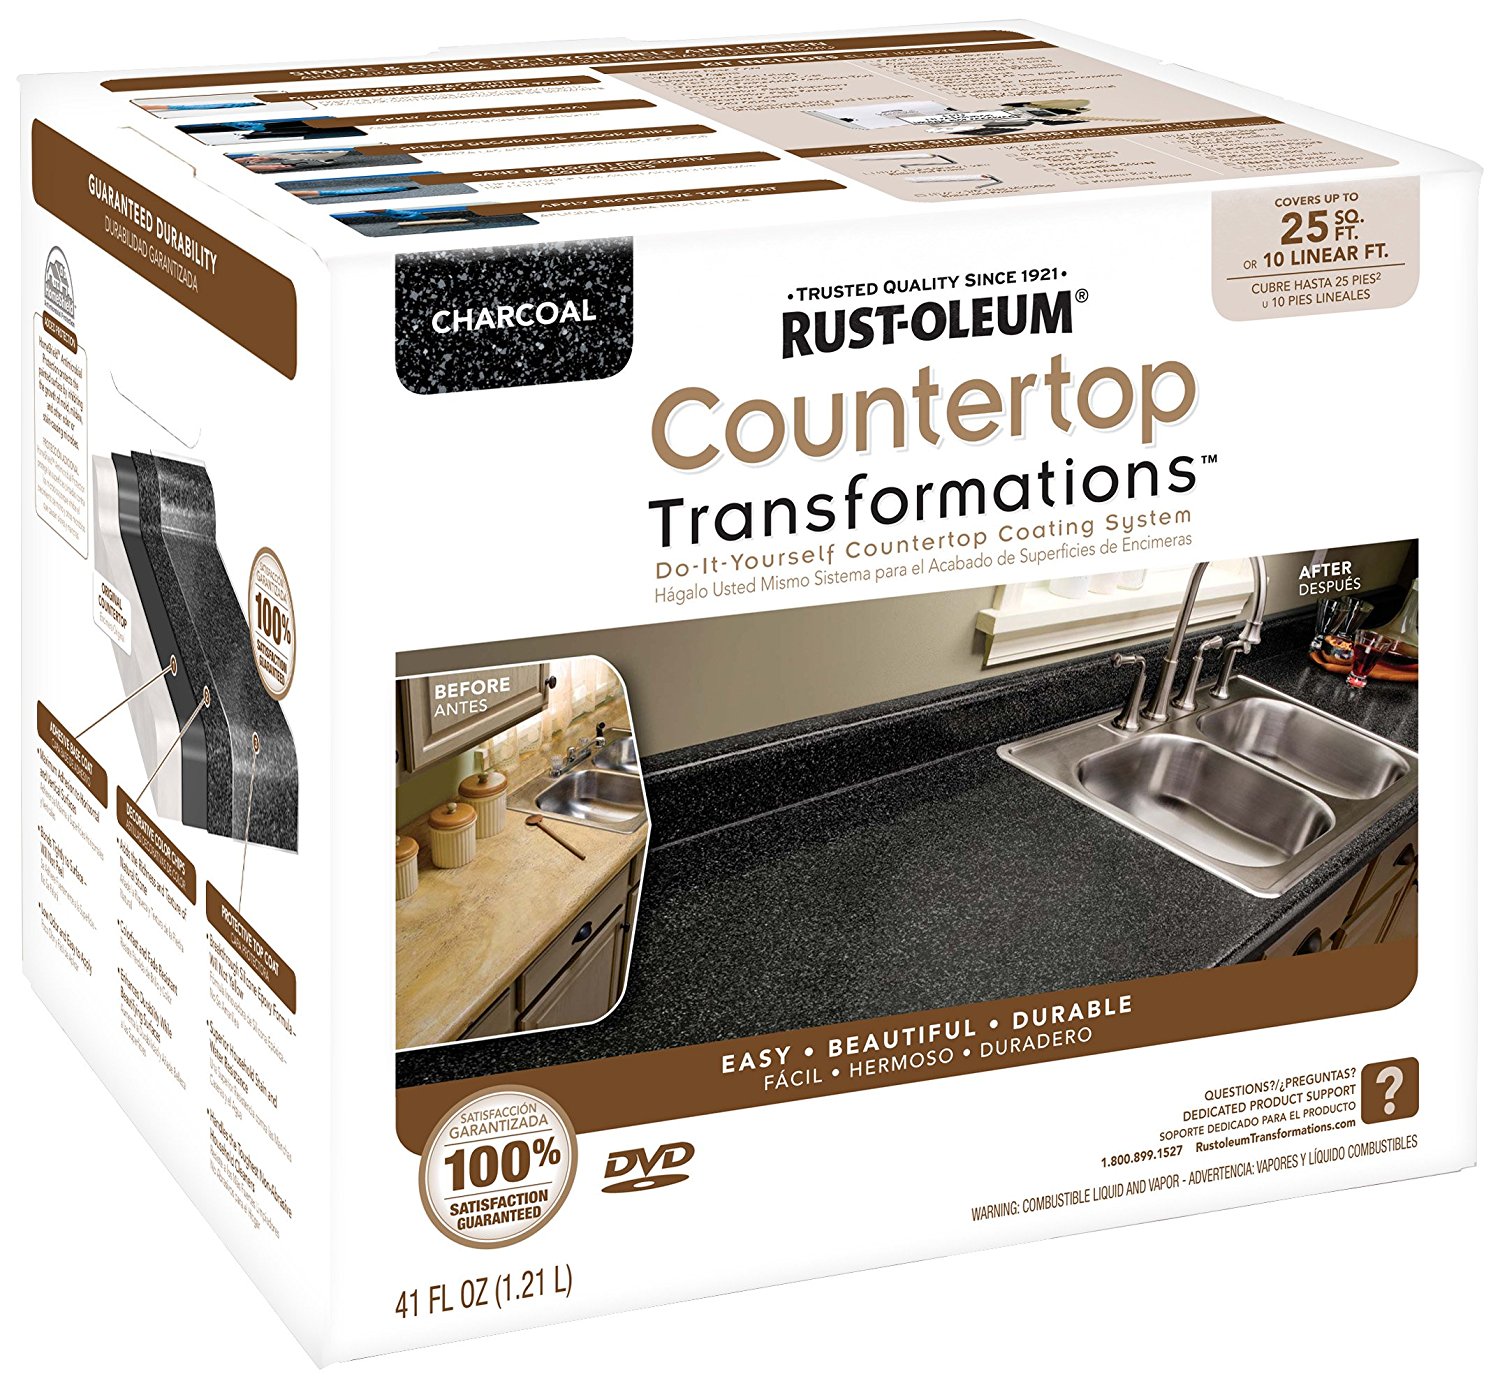 Rust-Oleum 258512 Counter Top Transformations, Small Kit, Charcoal